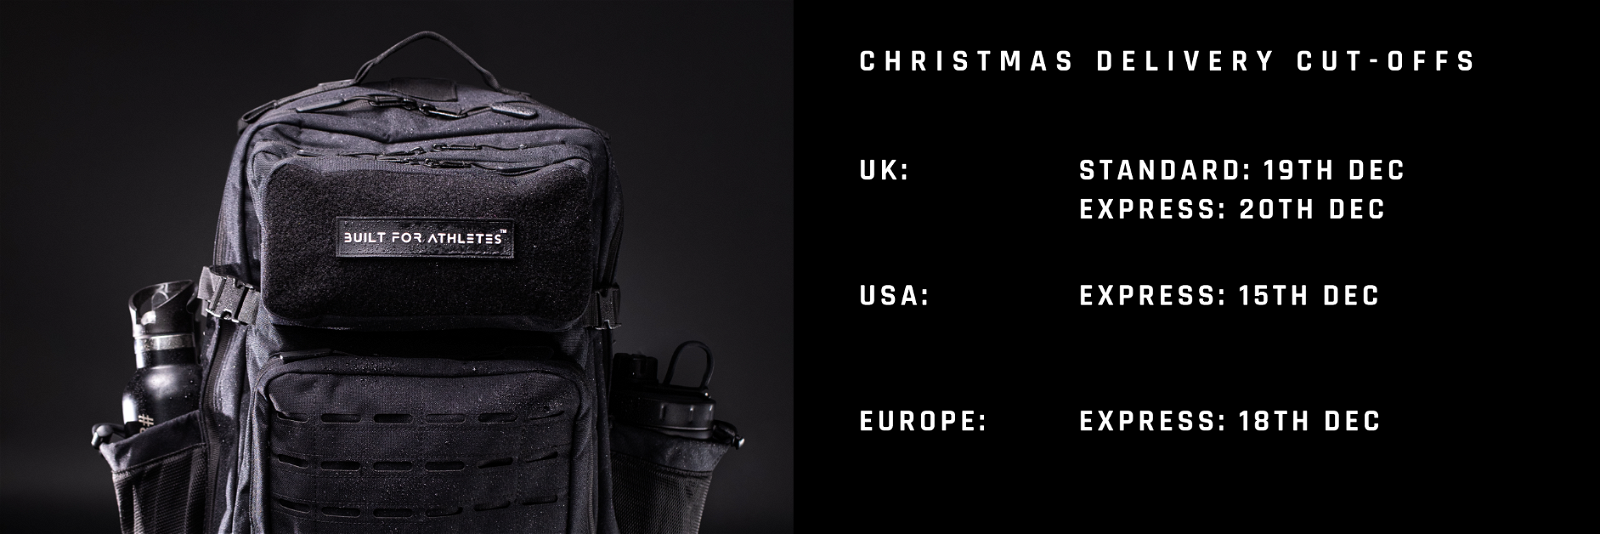 Order before the 20th Dec (UK Express) for delivery before Christmas.